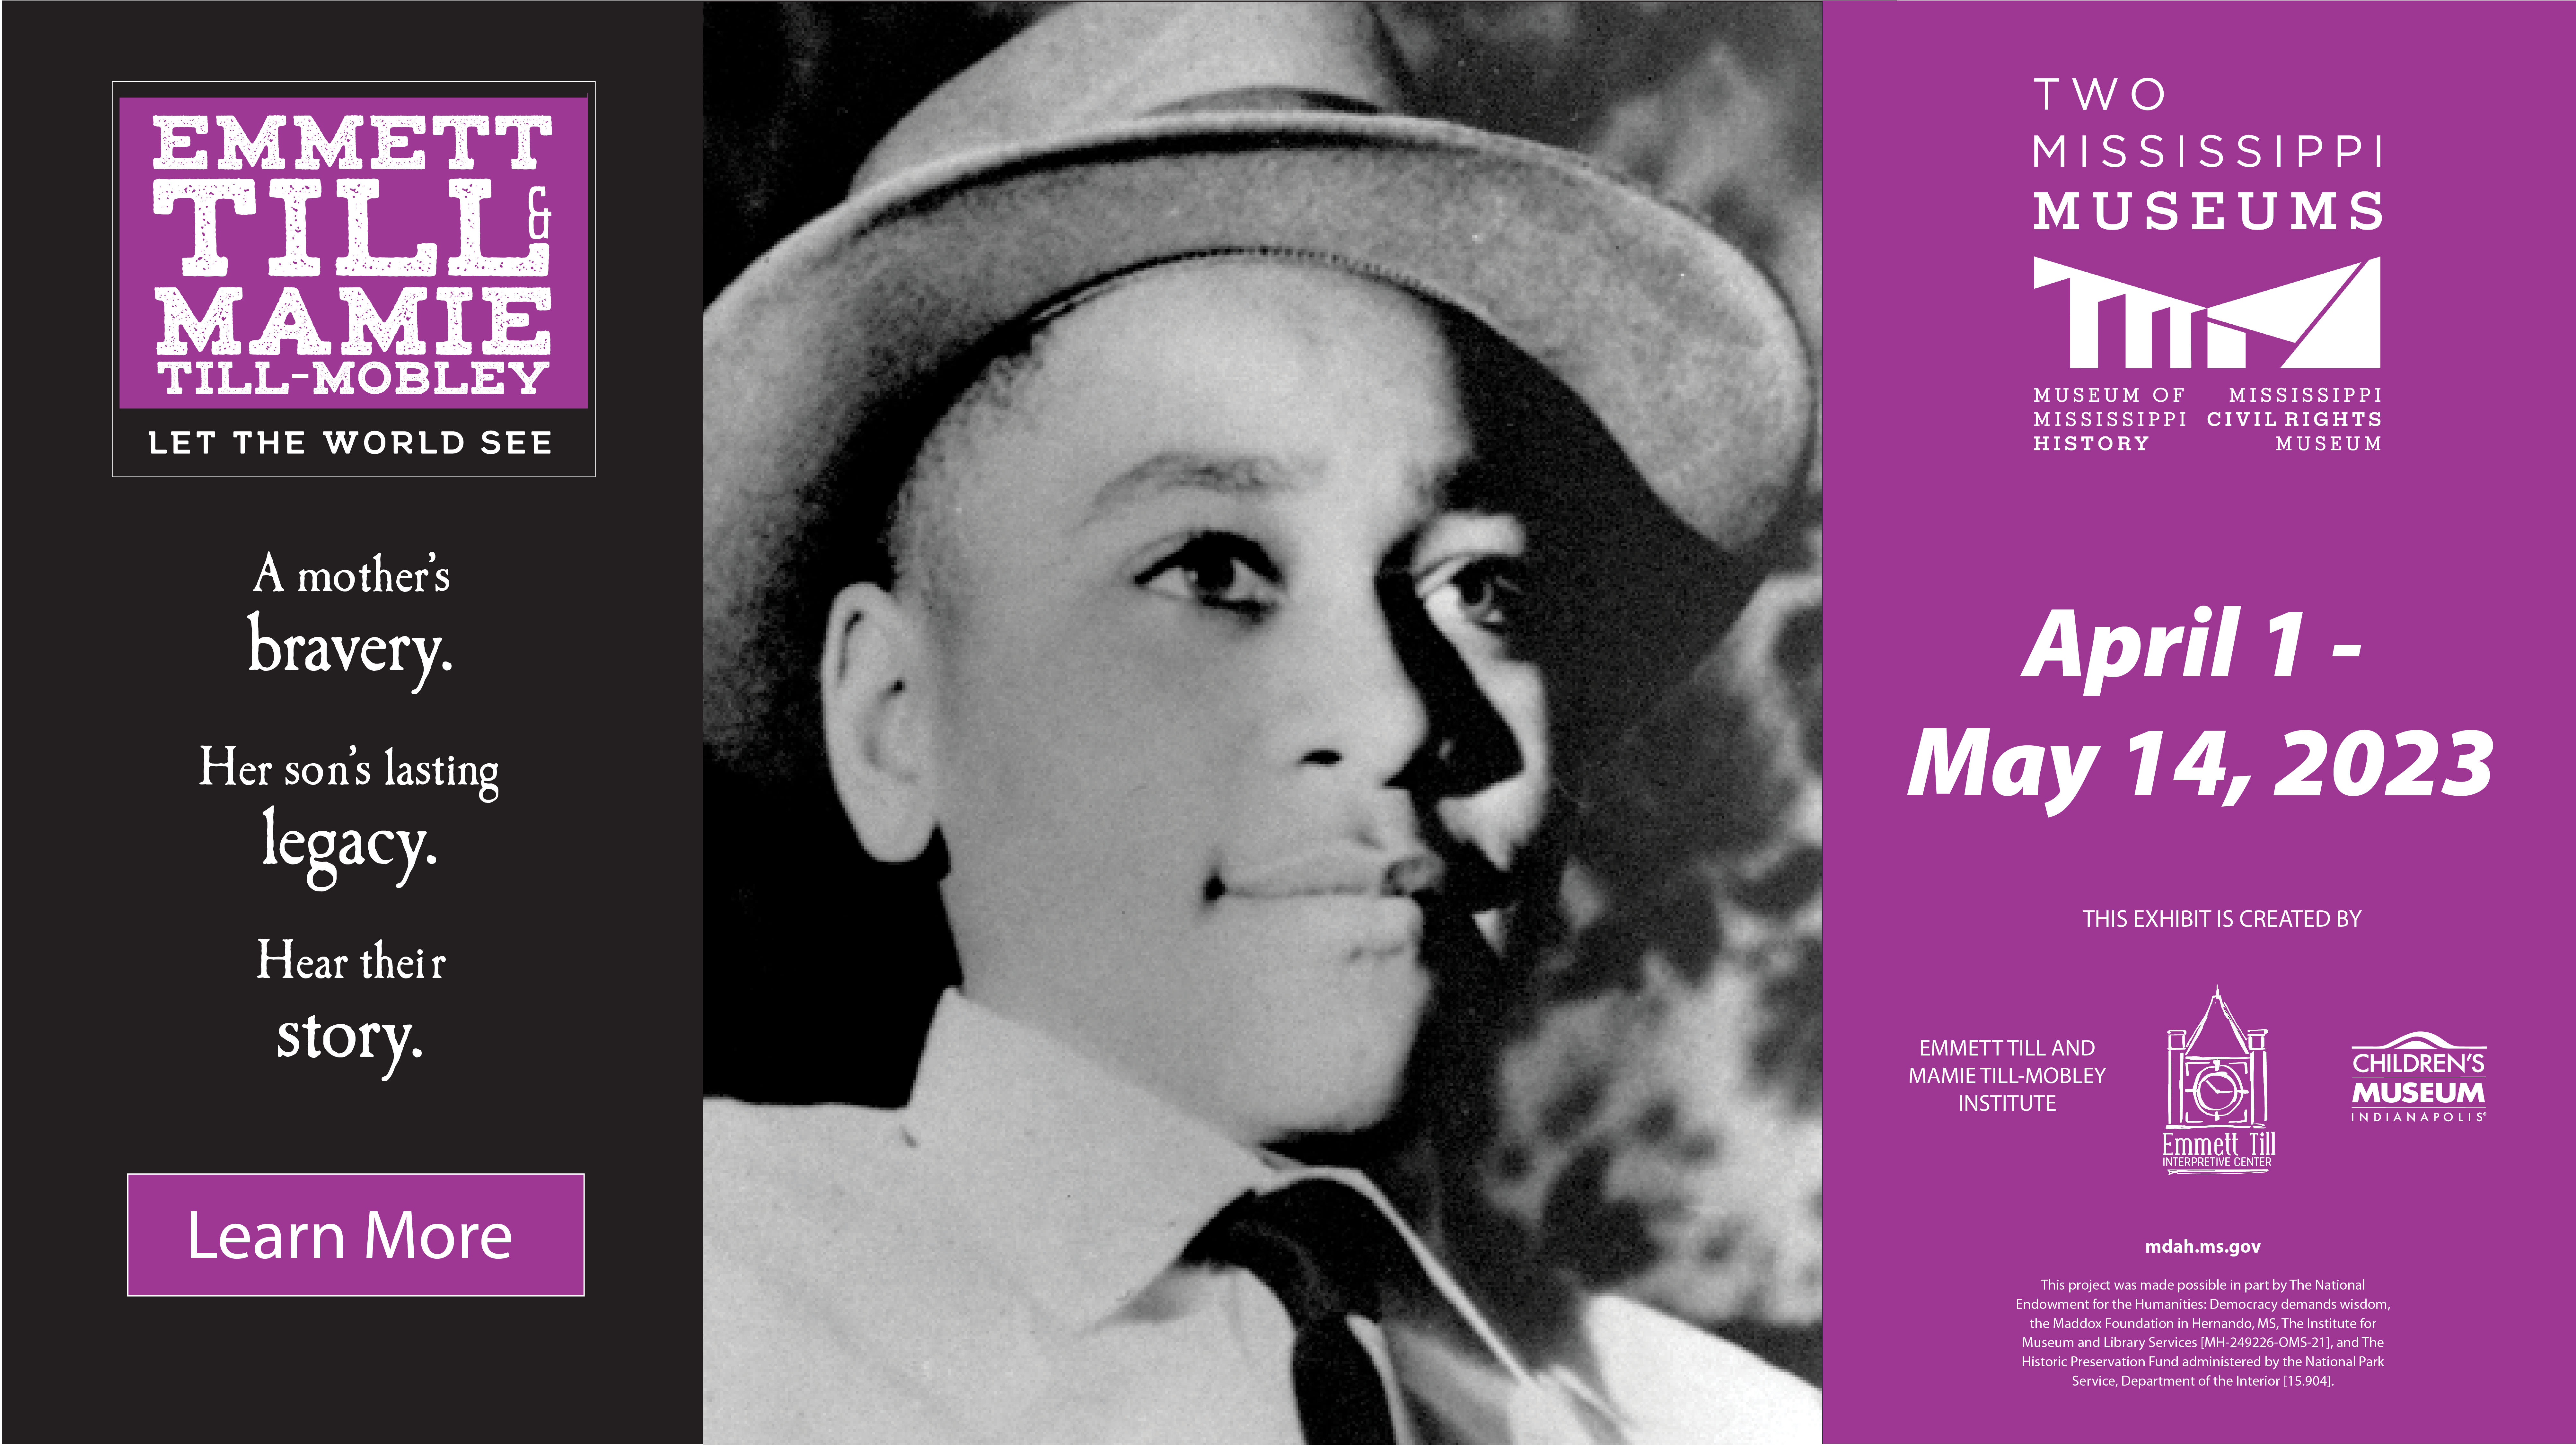 Emmett Till and Mamie Till-Mobley Exhibit, Open April 1 - May 14, 2023 at the Two Mississippi Museums